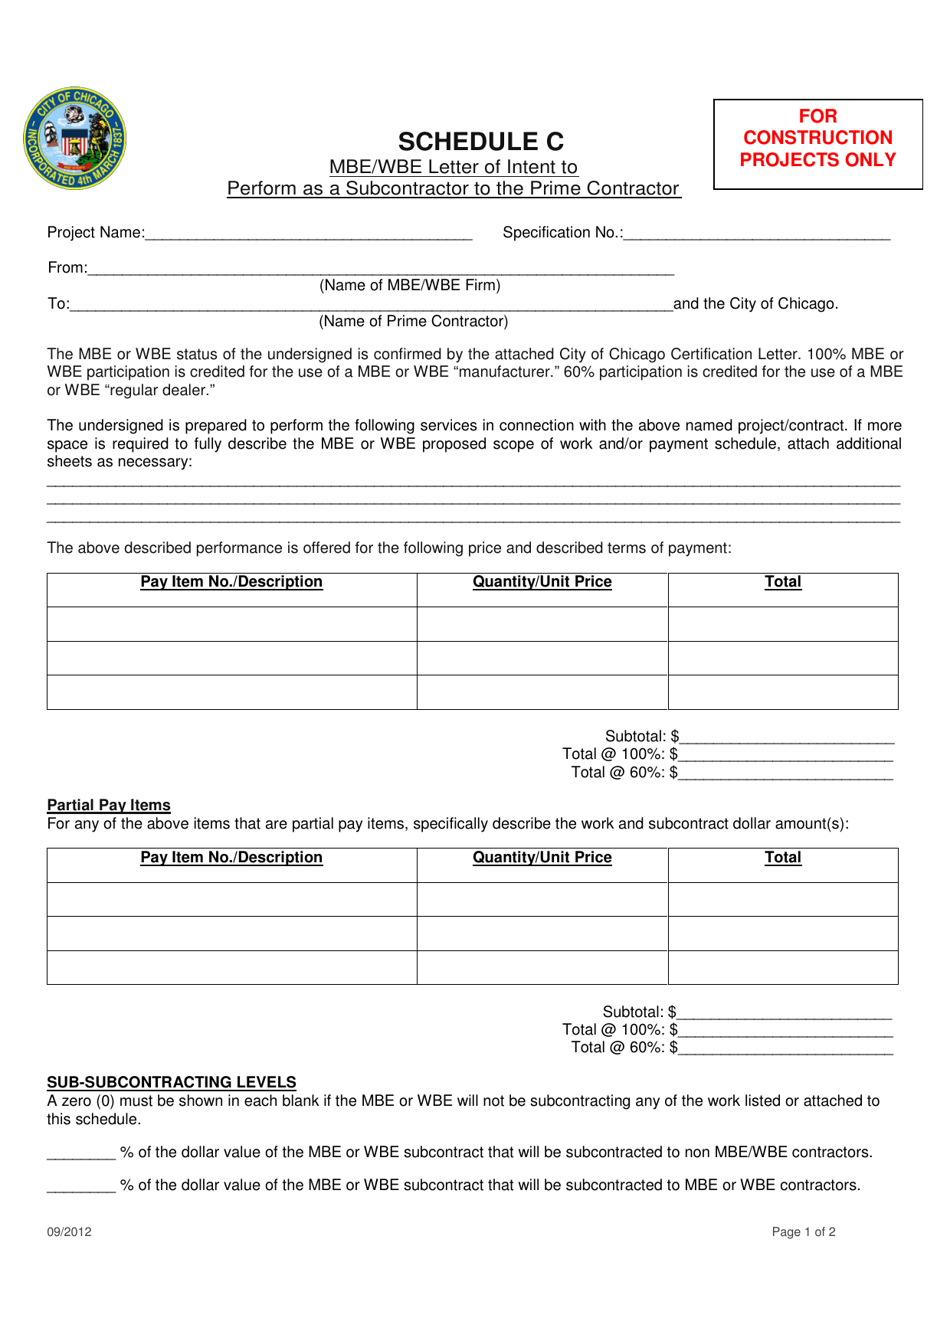 Schedule C Mbe / Wbe Letter of Intent to Perform as a Subcontractor to the Prime Contractor - City of Chicago, Illinois, Page 1